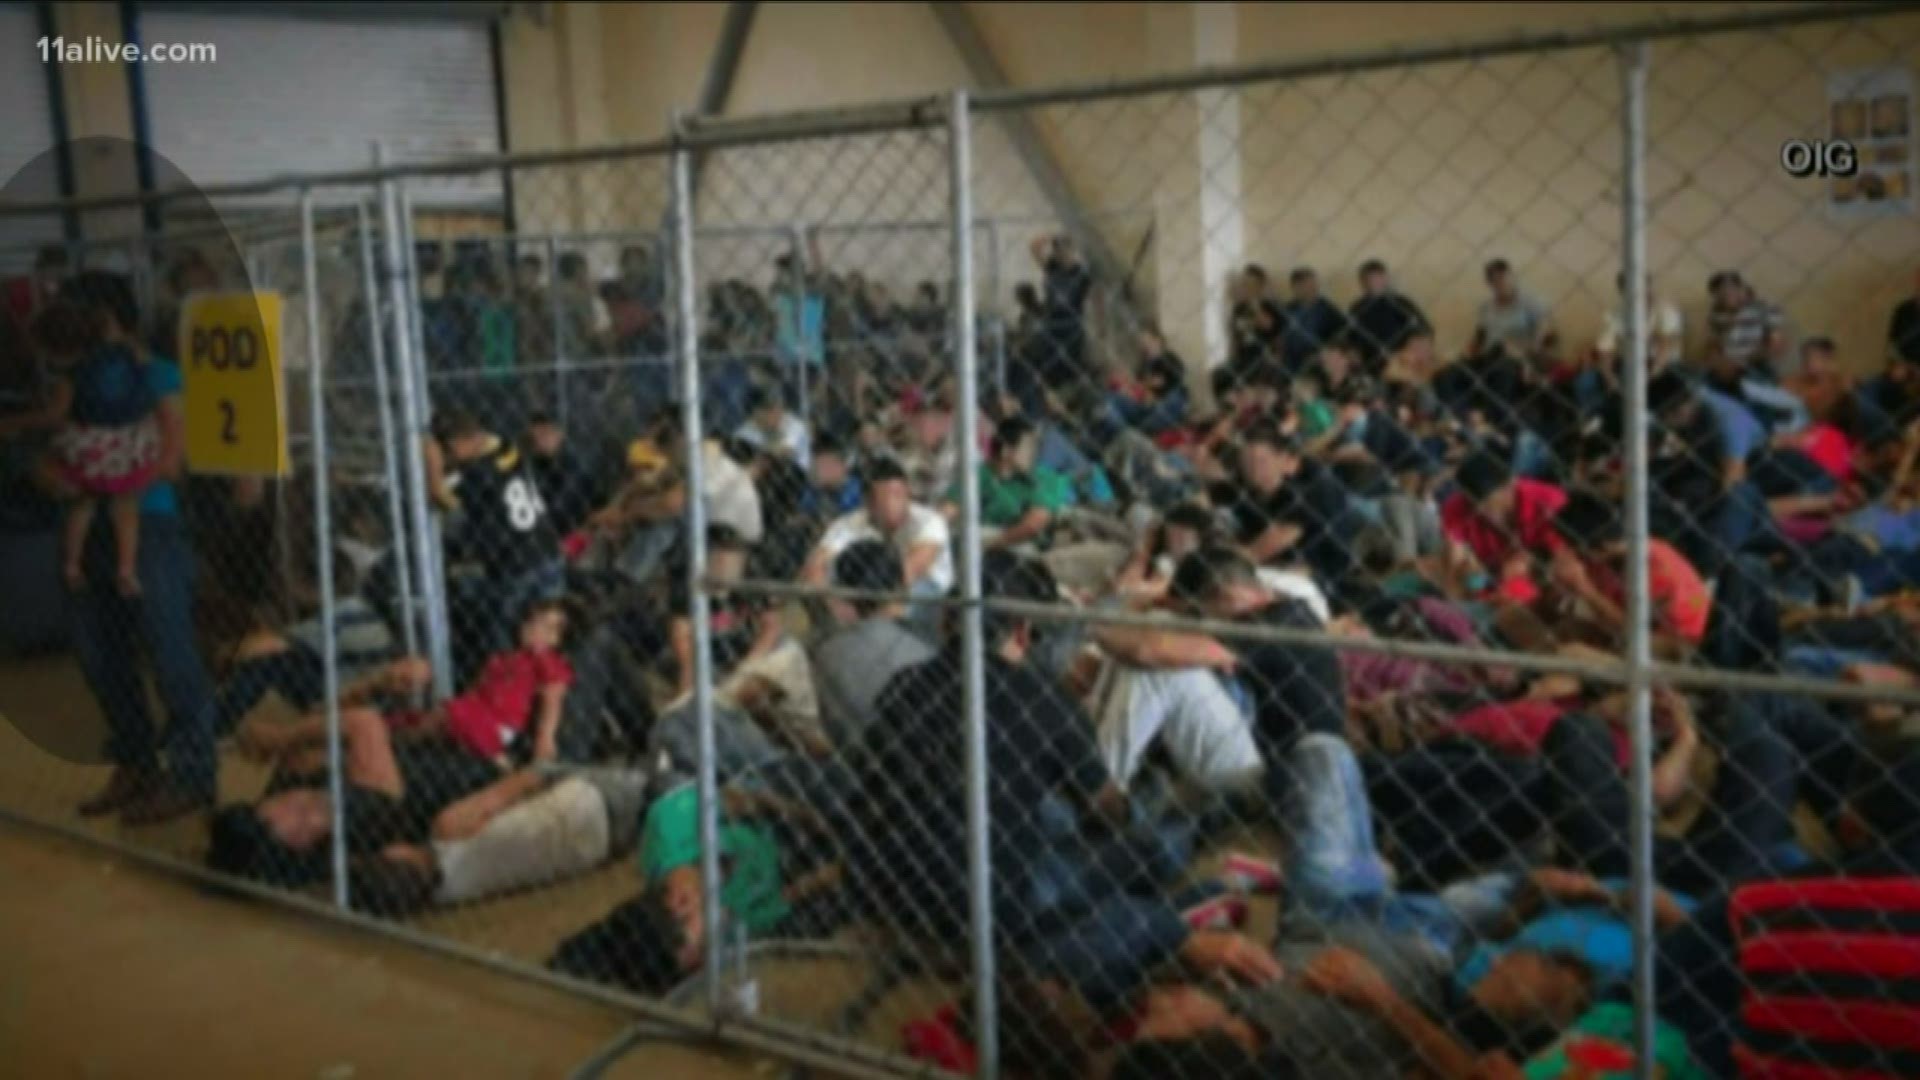 Protests were staged across the country on Tuesday, including in Atlanta, as photos were released showing crowded conditions at border detention facilities.